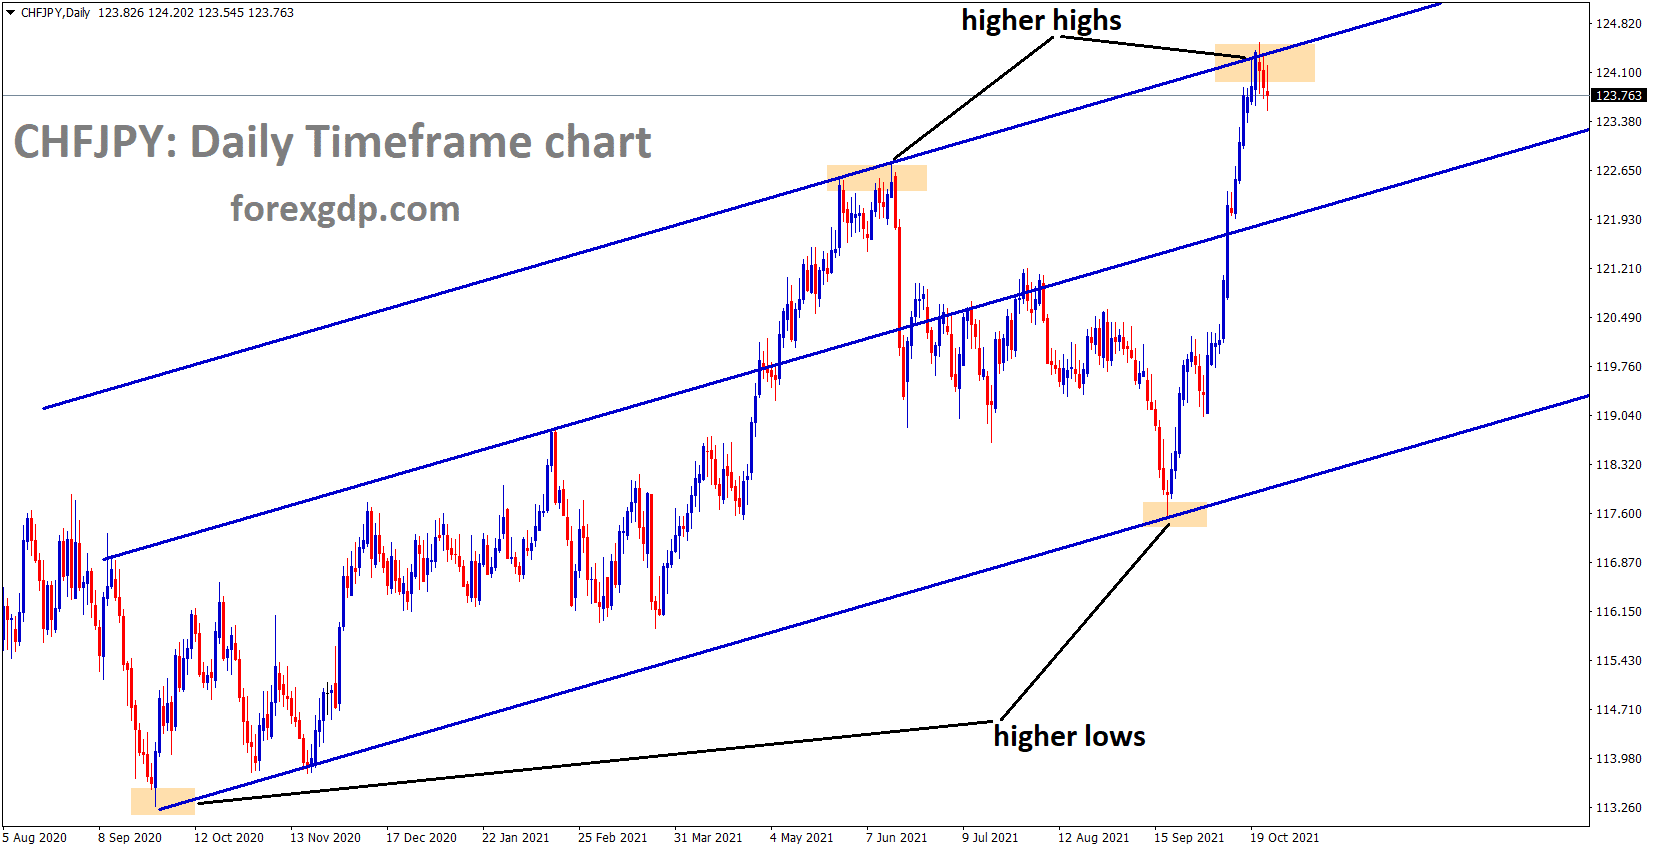 CHFJPY is moving in an ascending channel and higher high progress